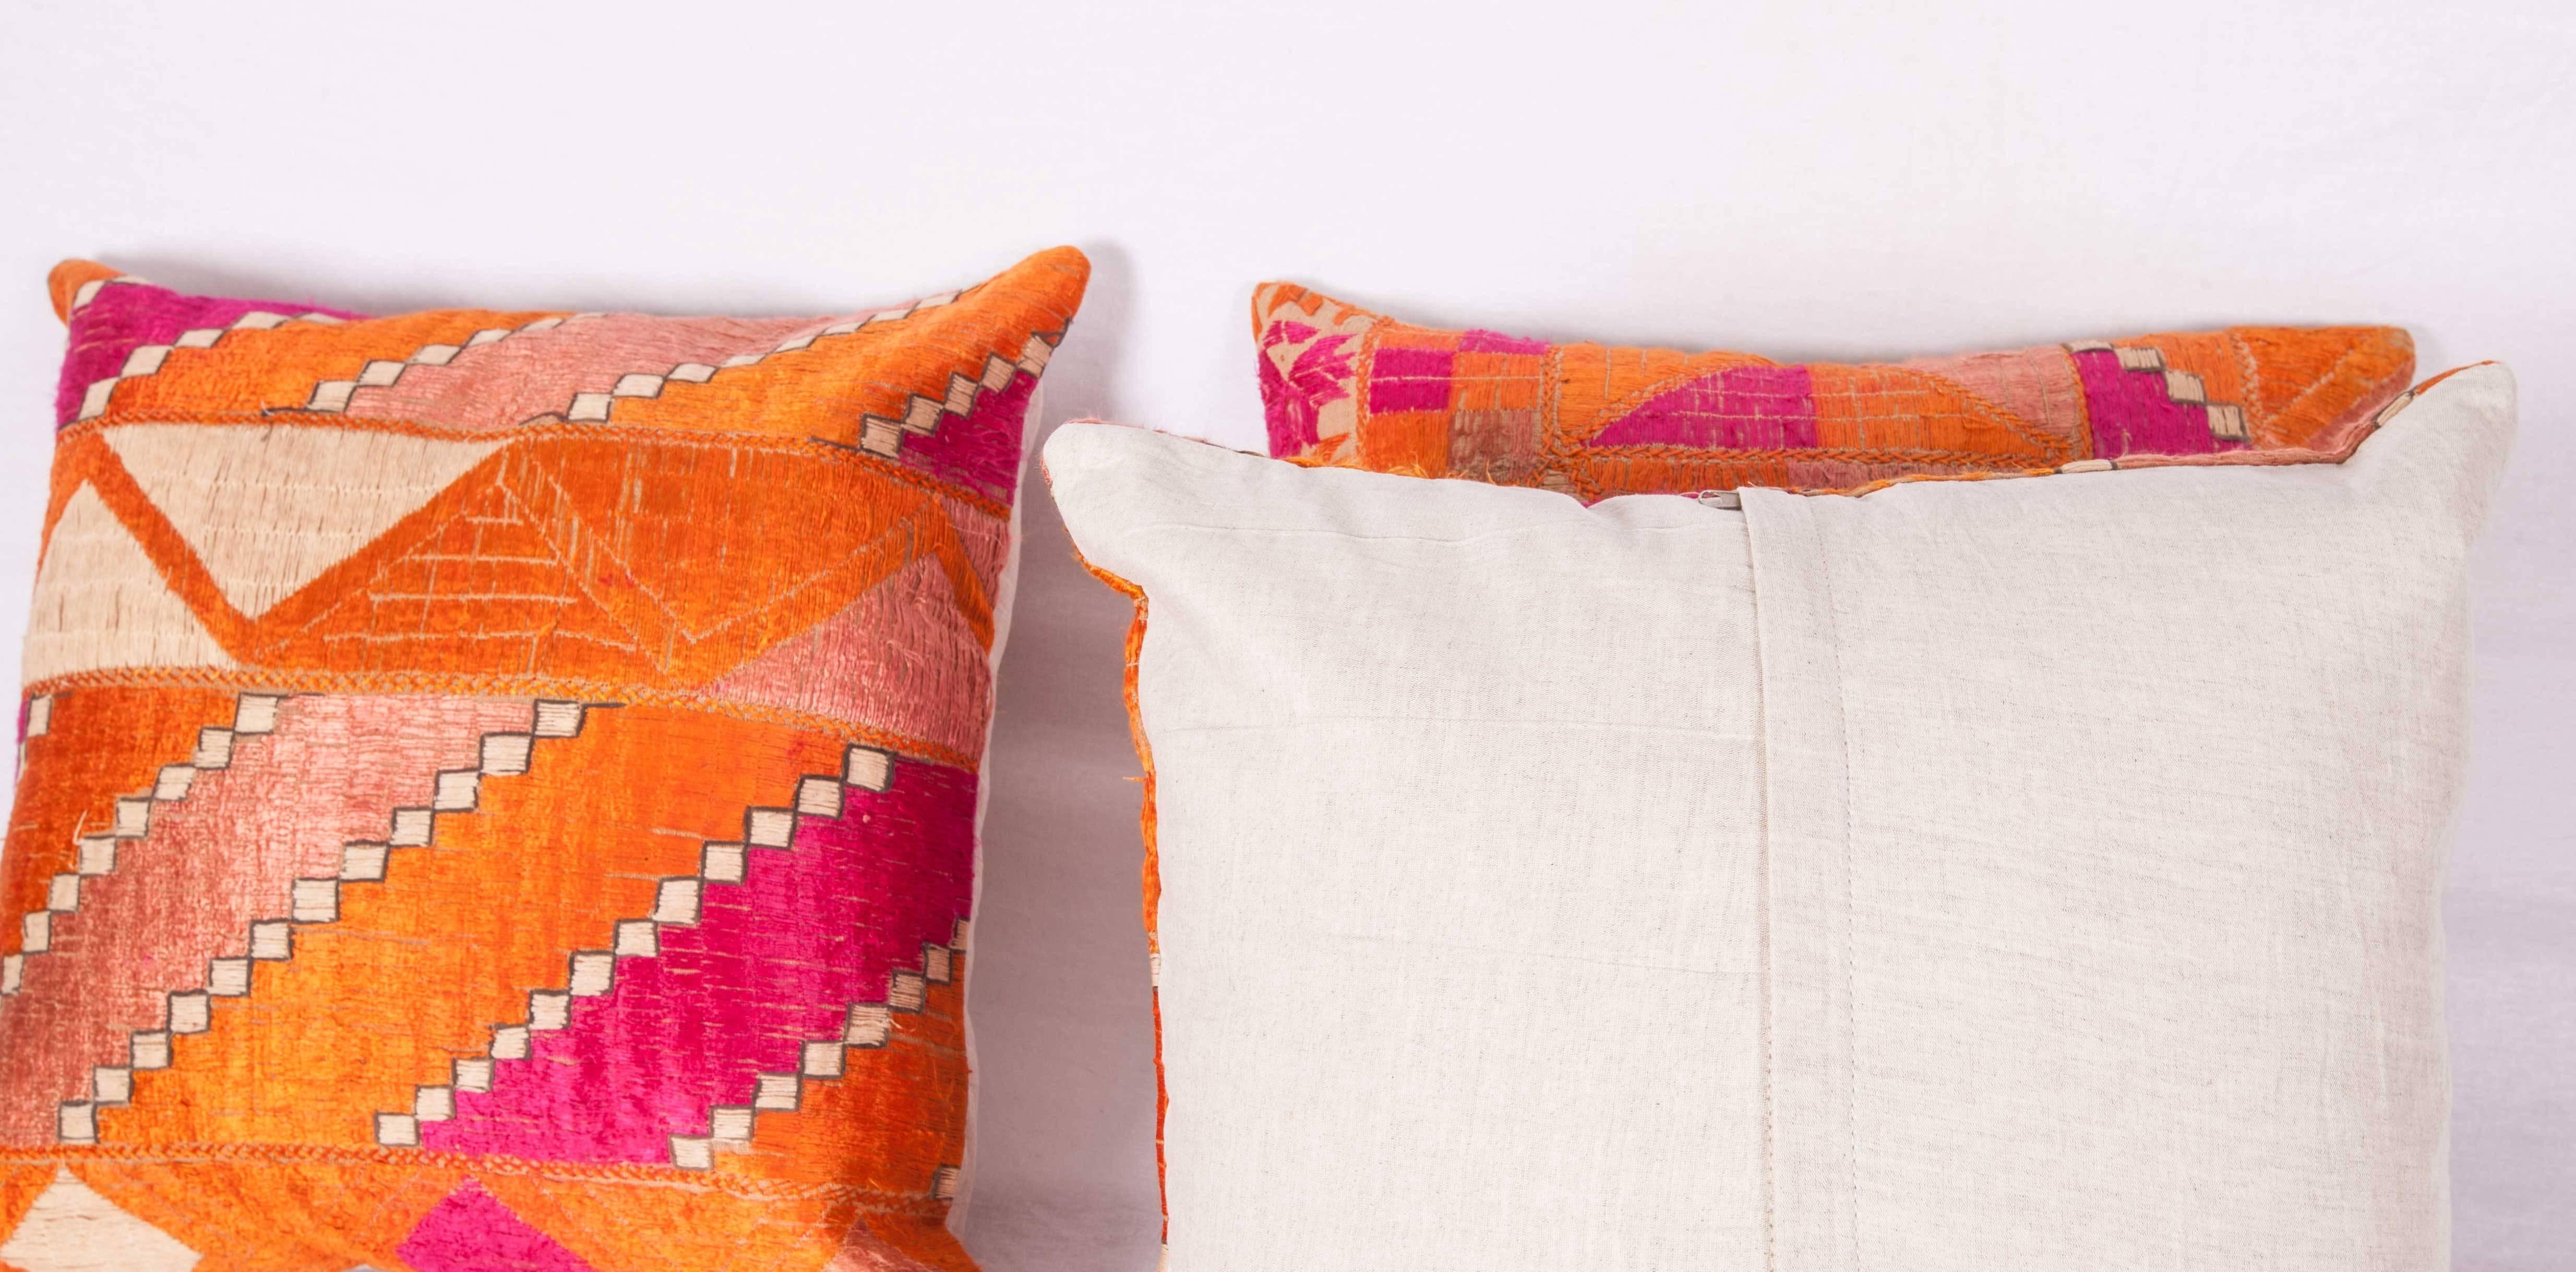 Embroidered Old Phulkari Pillow Cases from India